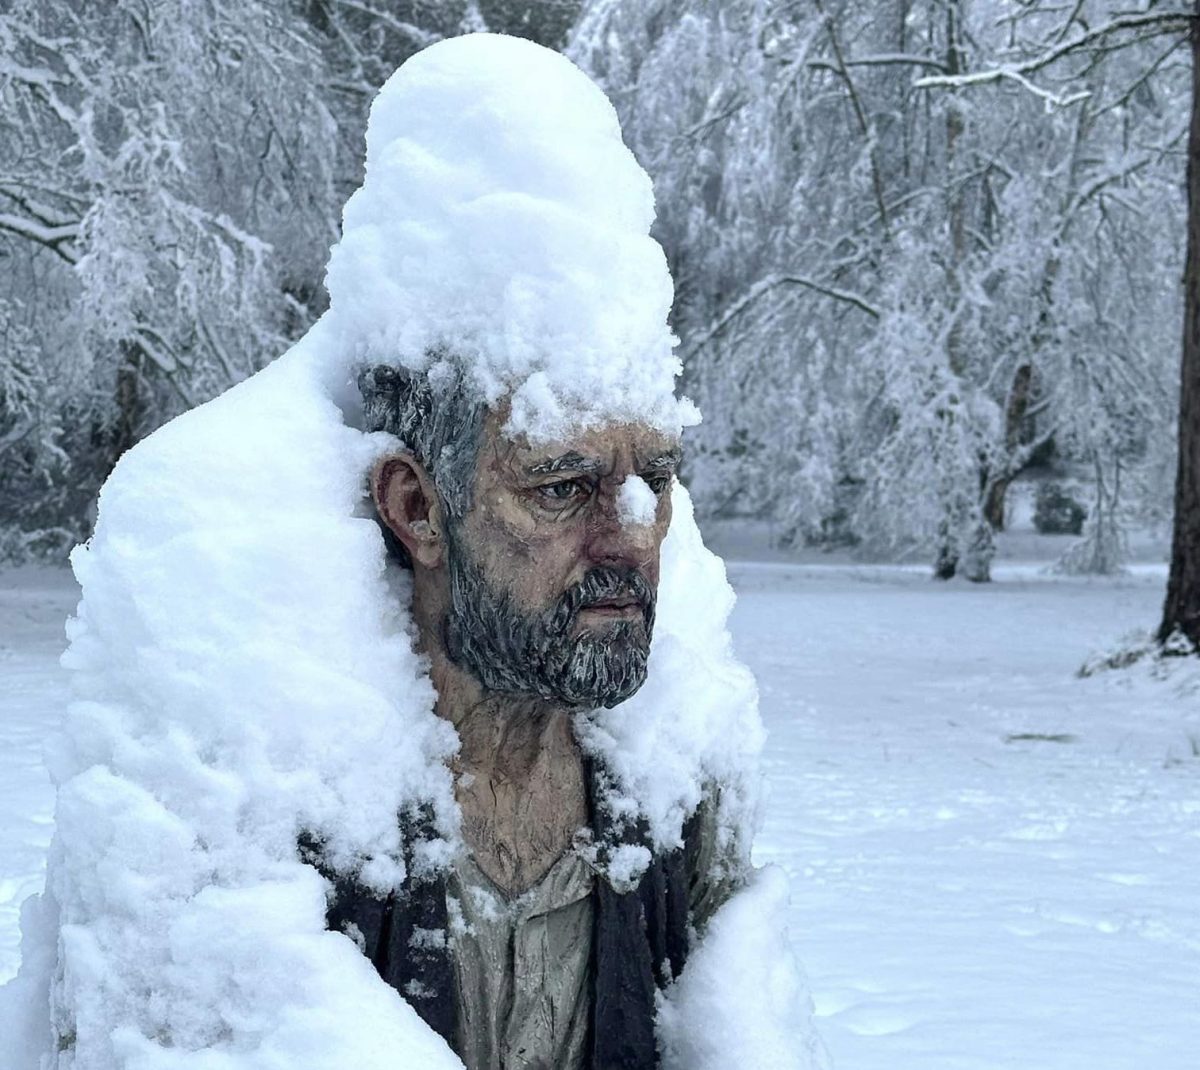 Social media comments have compared the frozen Seated Man to Jack Nicholson's character in <em>The Shining</em>. 